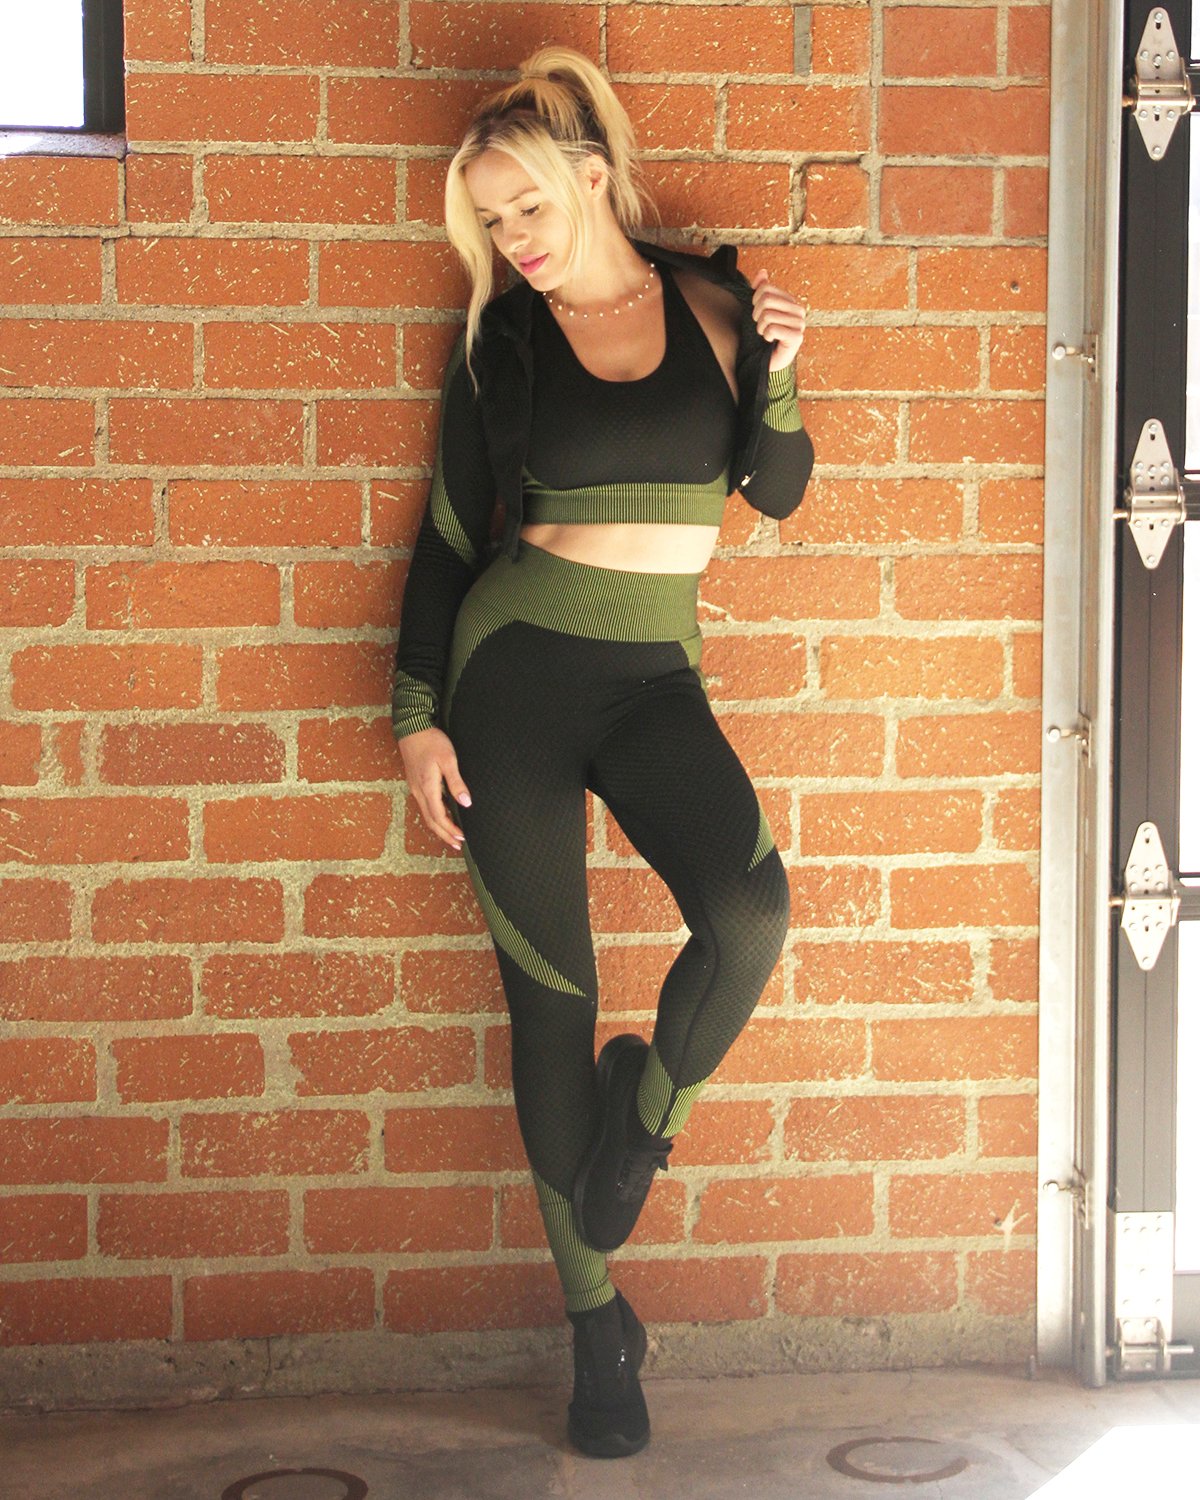 Seamless Jacket, Leggings & Sports Top 3 Set - Black With Green - Women's Activewear Set from fluentclothing.com